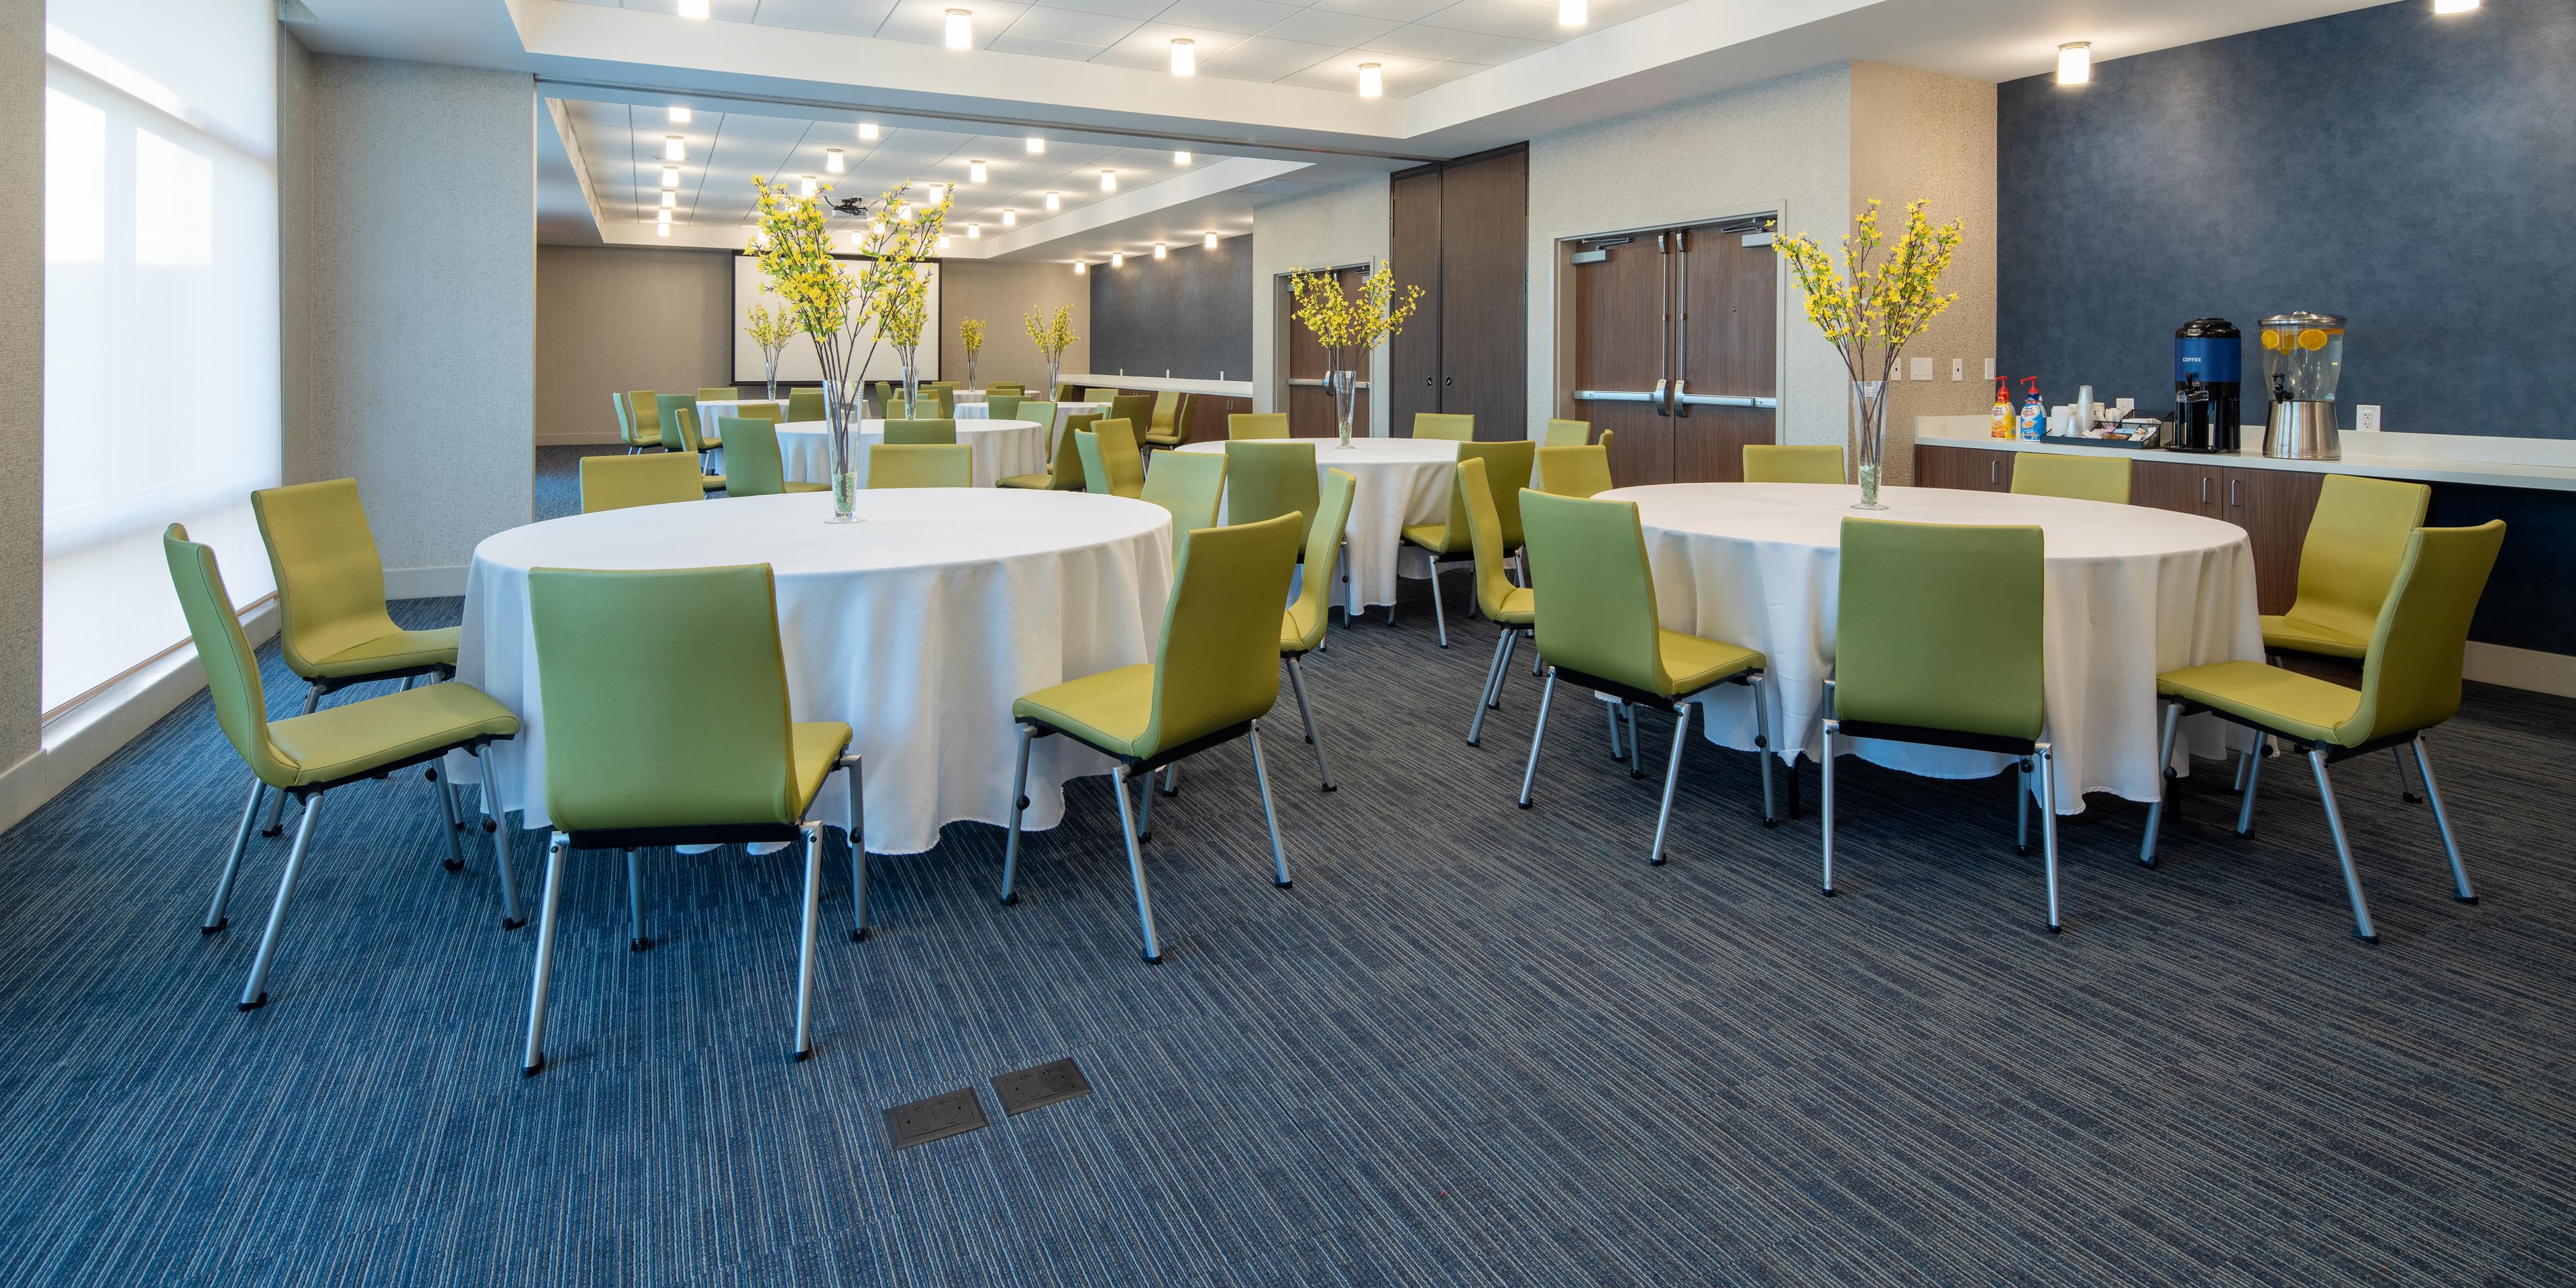 Our hotel offers unique event space at our property. We have 4 meeting rooms to choose from with over 2,000 sq. feet of event space.